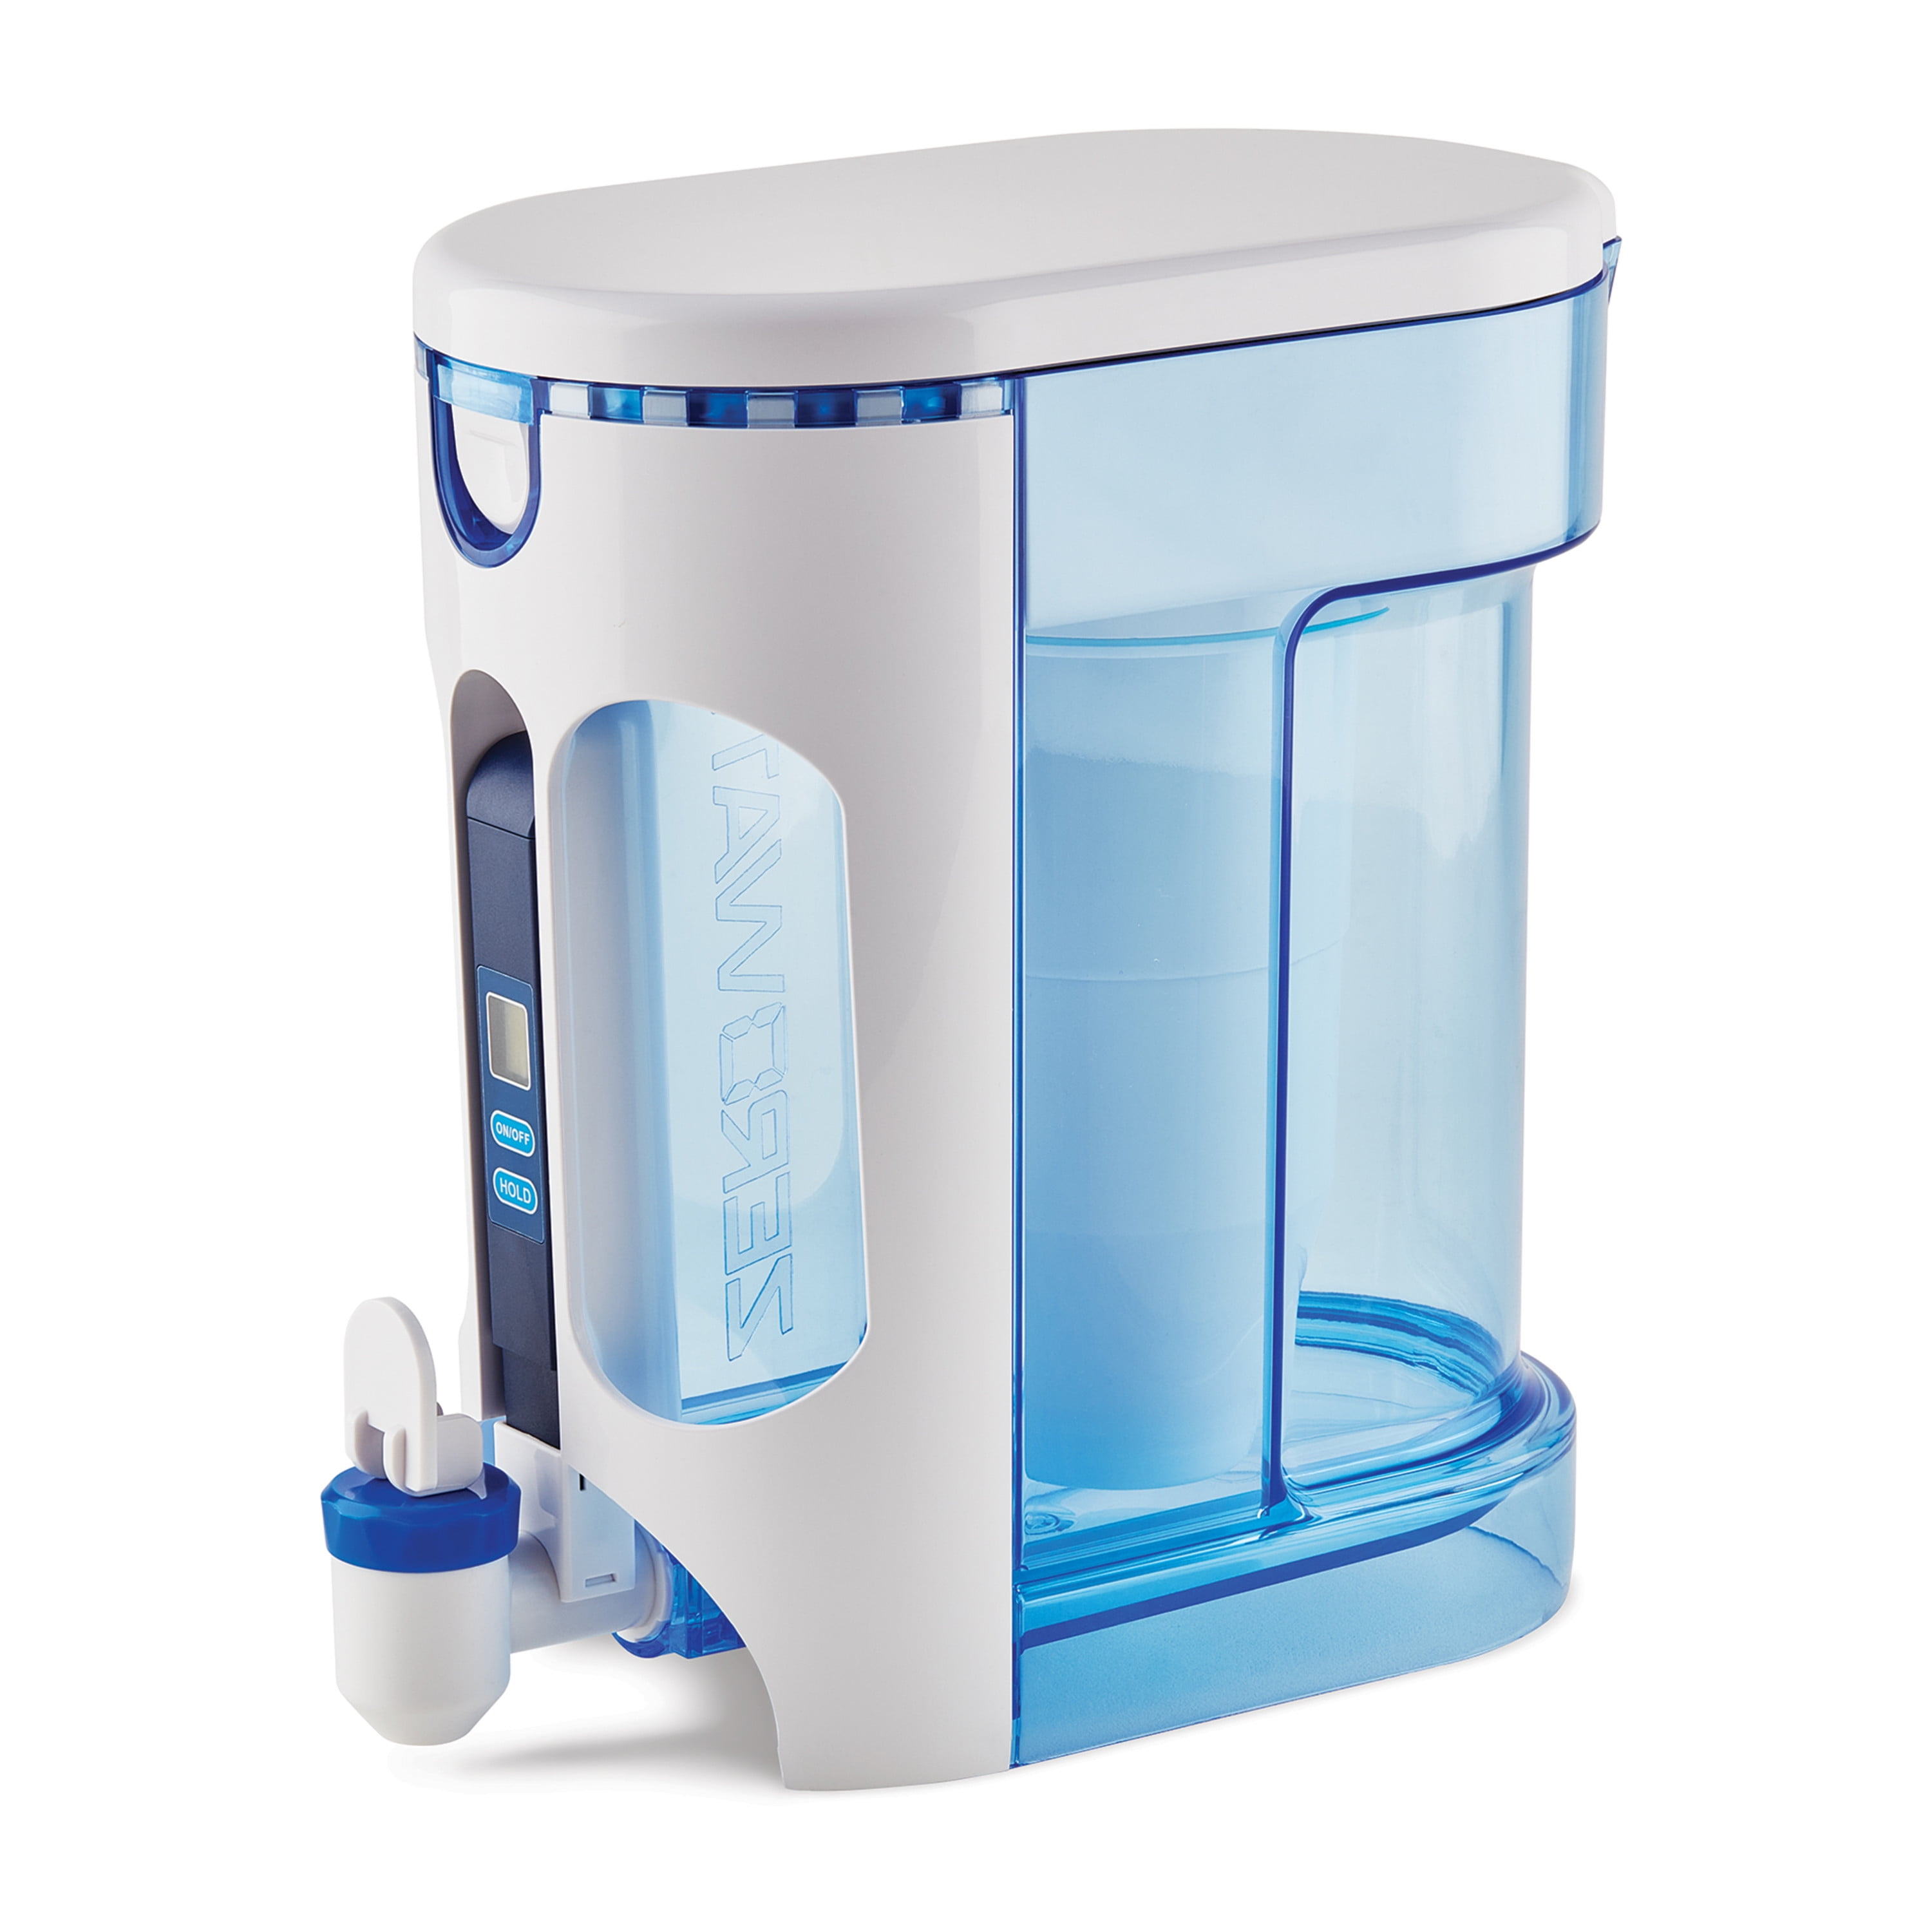  ZeroWater 22-Cup Ready-Read 5-Stage Water Filter Dispenser with  Instant Read Out - 0 TDS IAPMO Certified to Reduce Lead, Chromium, and  PFOA/PFOS: Home & Kitchen